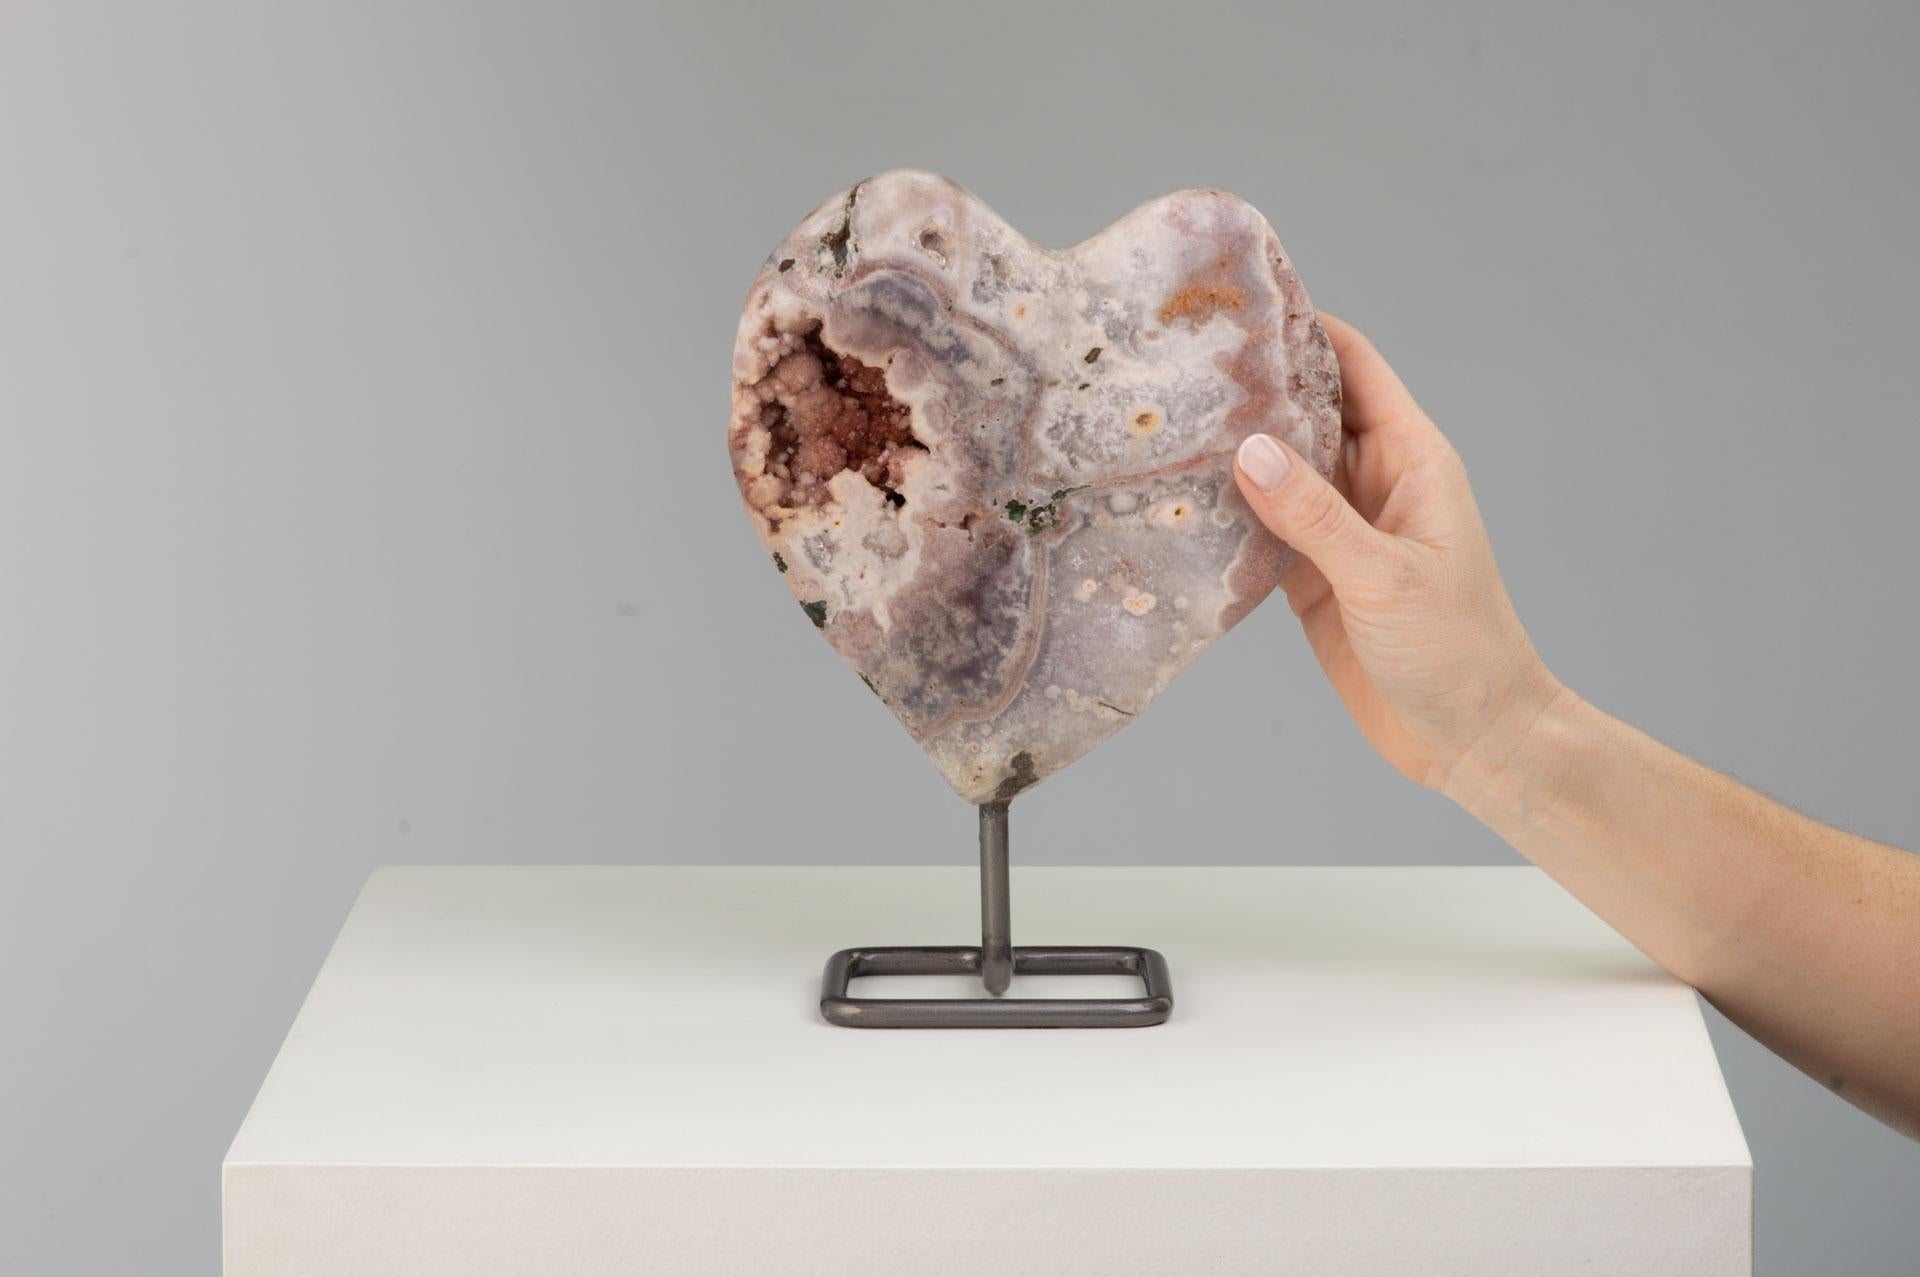 An attractive geode section cut and polished into a heart shape, revealing
white quartz layers with various agate layers. A cavity to the left with pink
druze resembling cotton candy.

This piece was legally and ethically sourced directly in the